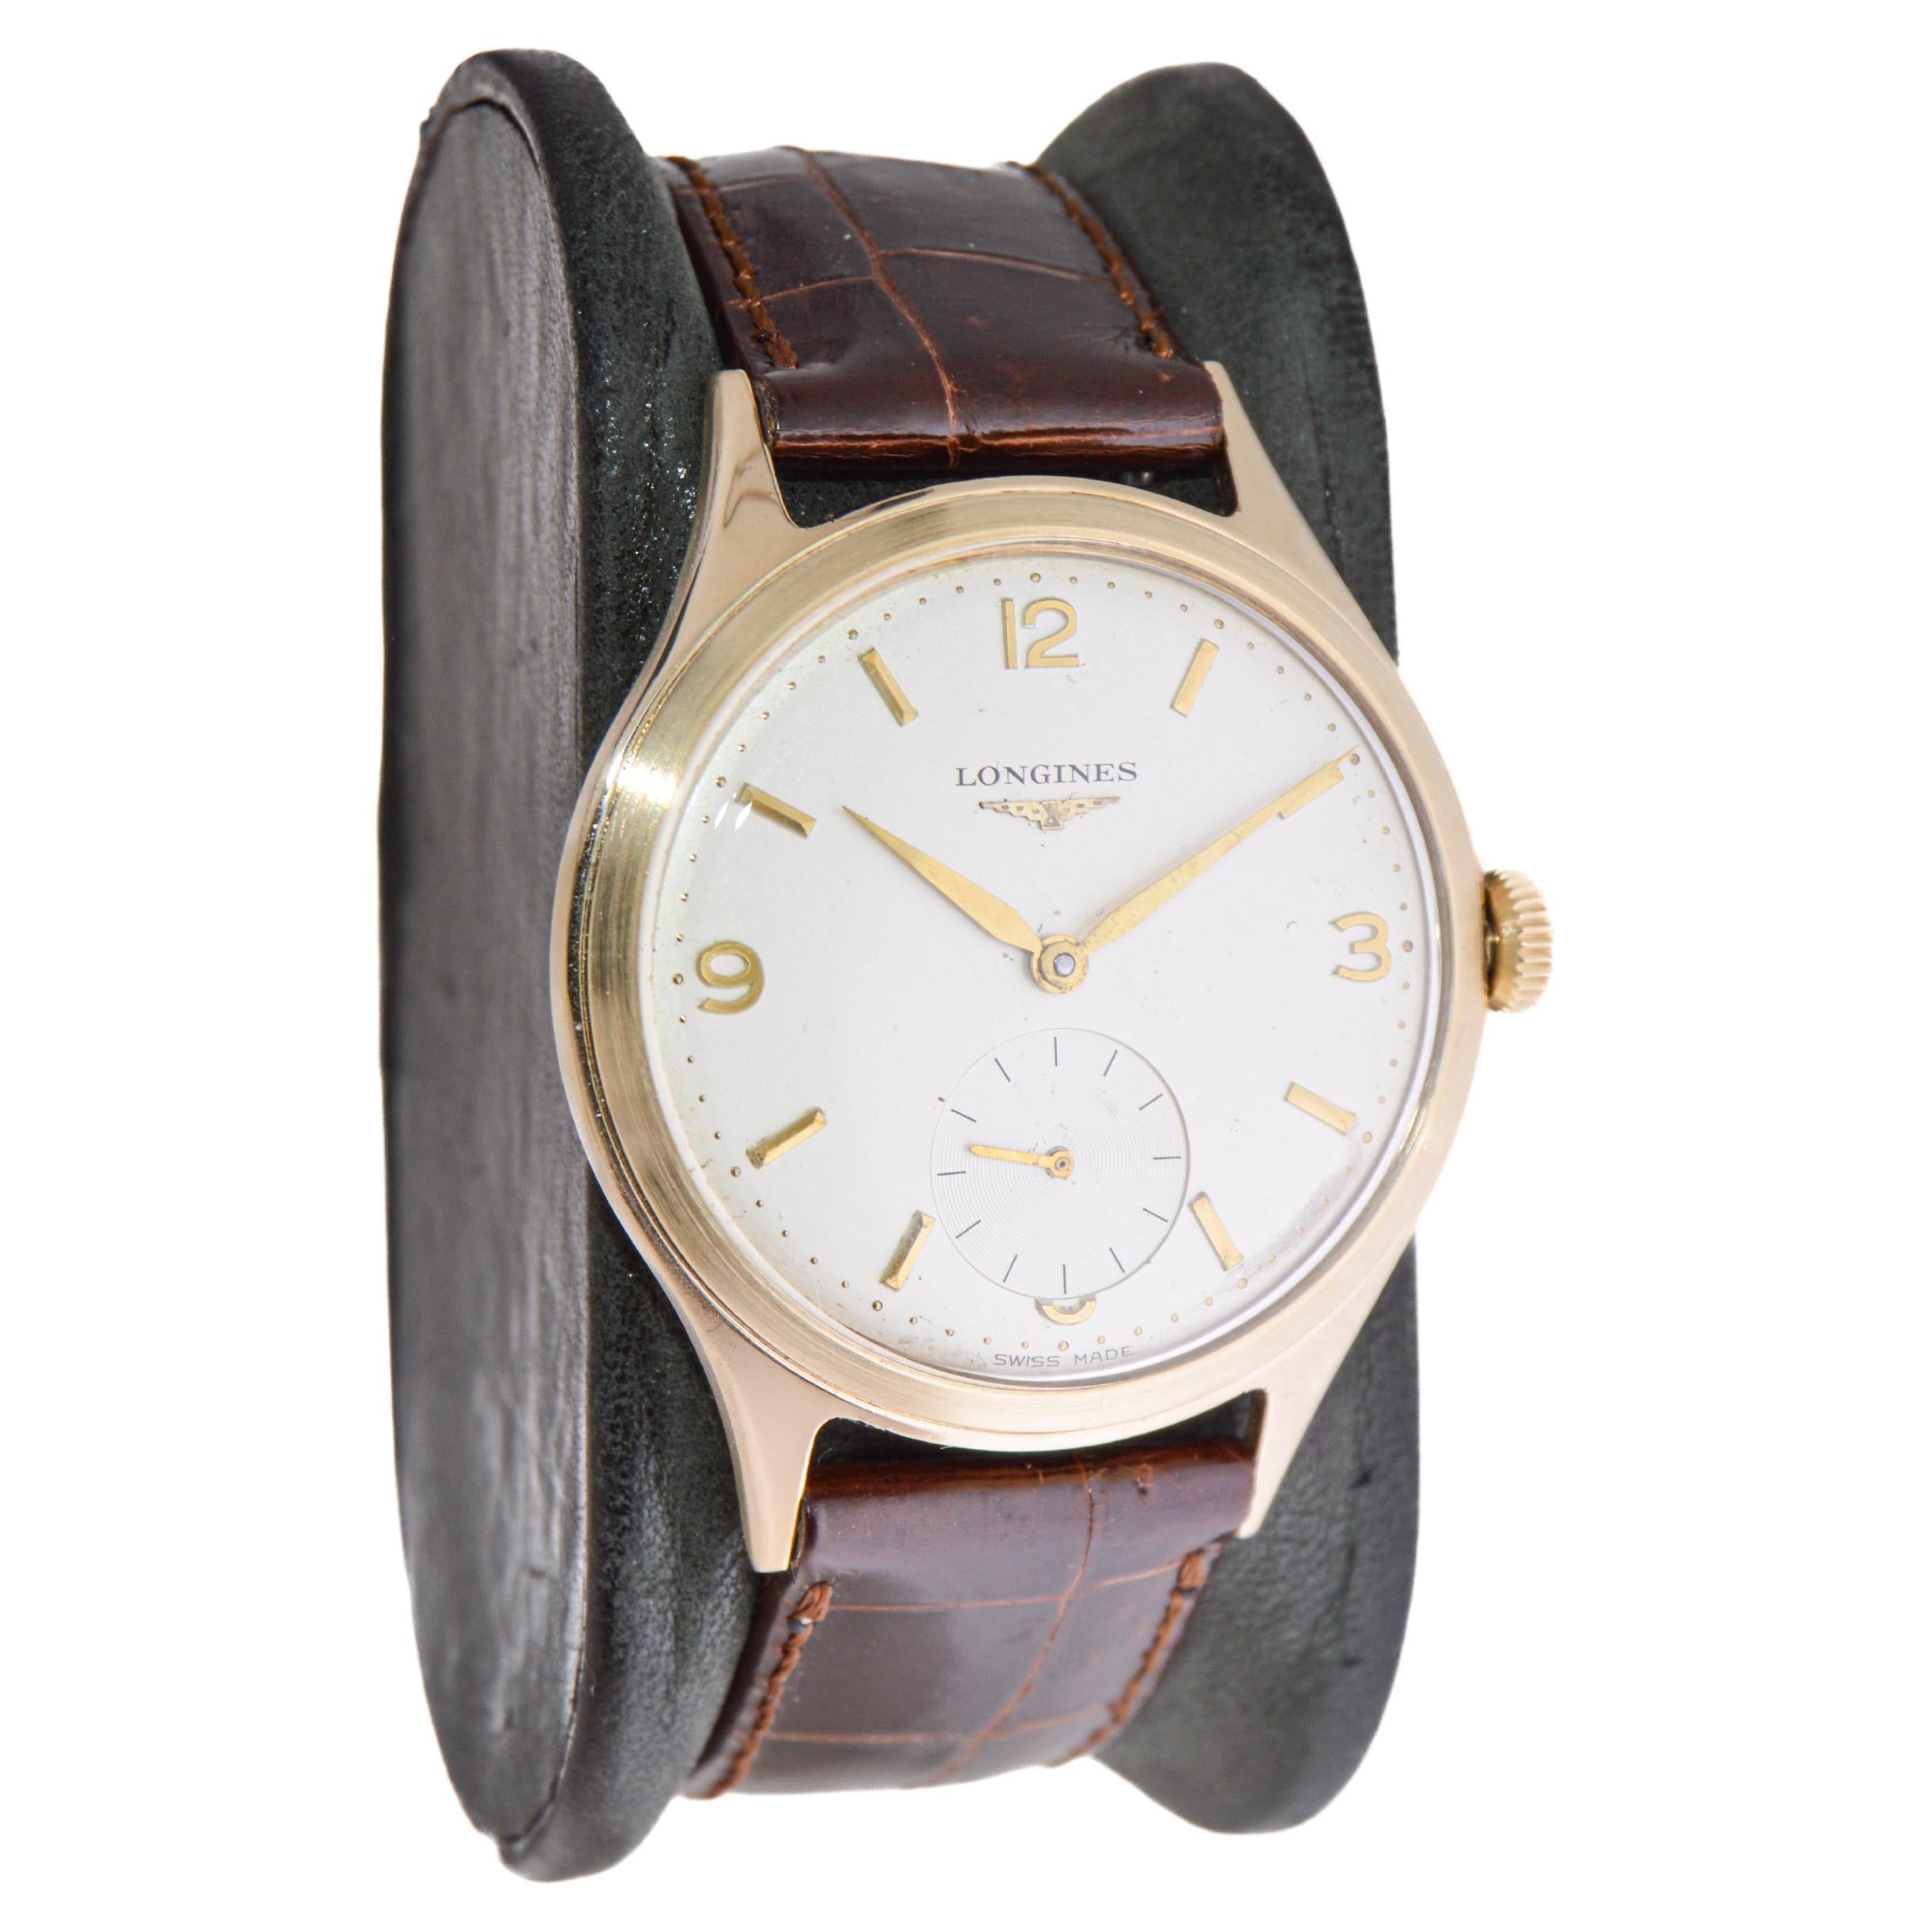 FACTORY / HOUSE: Longines Watch Company
STYLE / REFERENCE: Round / Art Deco 
METAL / MATERIAL: 9Kt. English Market
CIRCA / YEAR: 1940's
DIMENSIONS / SIZE: Length 43mm X Diameter 35mm
MOVEMENT / CALIBER: Manual Winding / 17 Jewels / Caliber 23 Z
DIAL